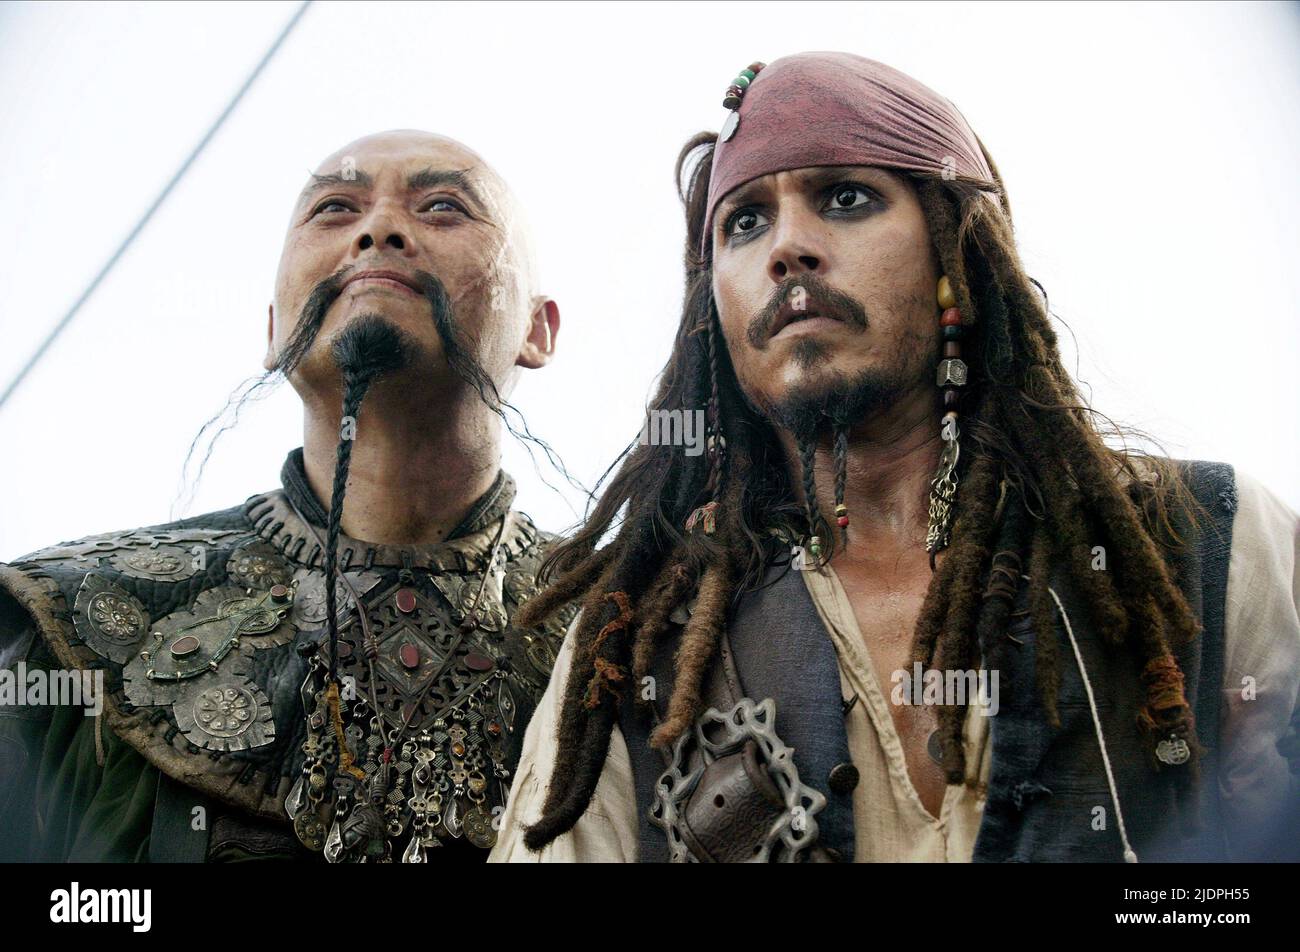 YUN-FAT,DEPP, PIRATES OF THE CARIBBEAN: AT WORLD'S END, 2007, Stock Photo